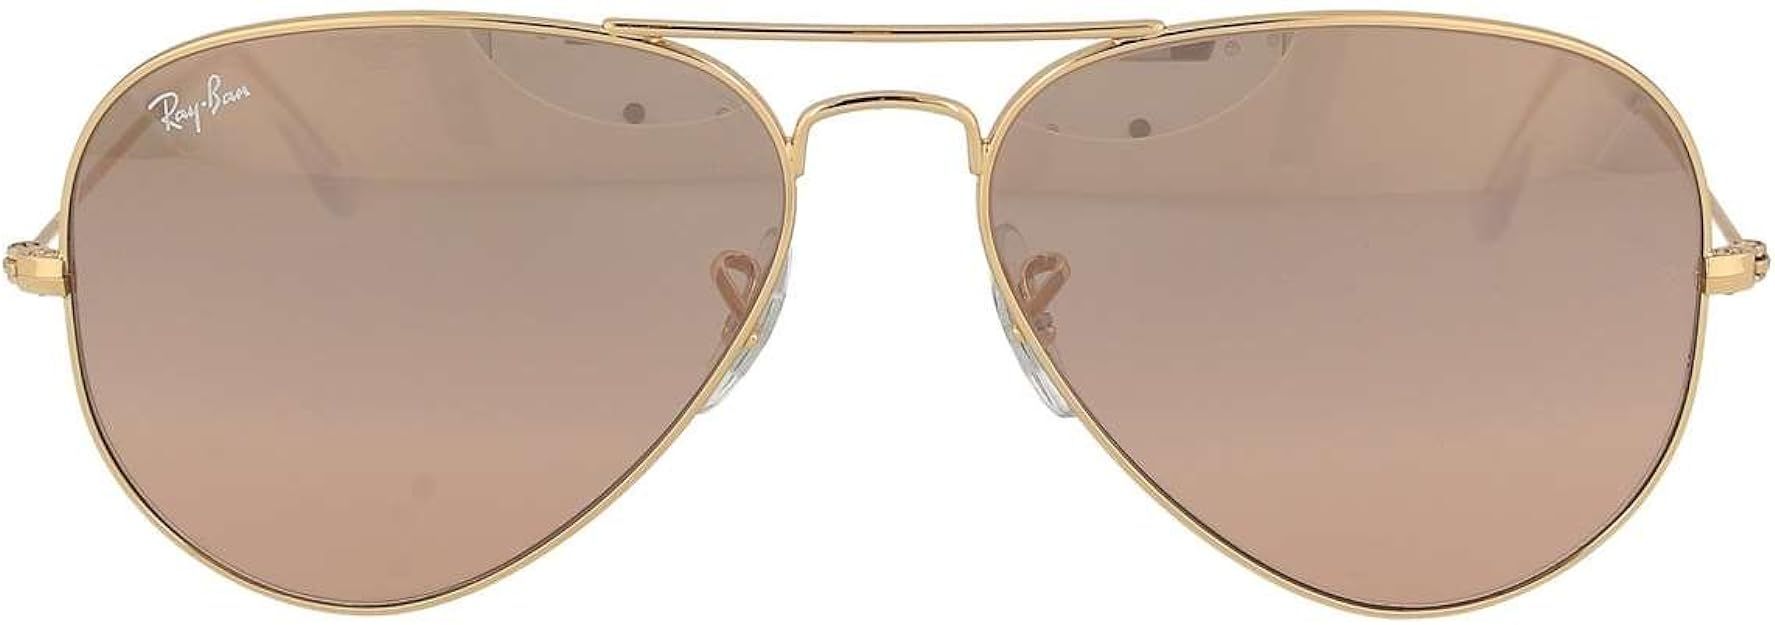 Ray Ban Aviator Sunglasses RB3025 001/3E 55mm (small) Gold Frame, Pink Mirror | Amazon (US)